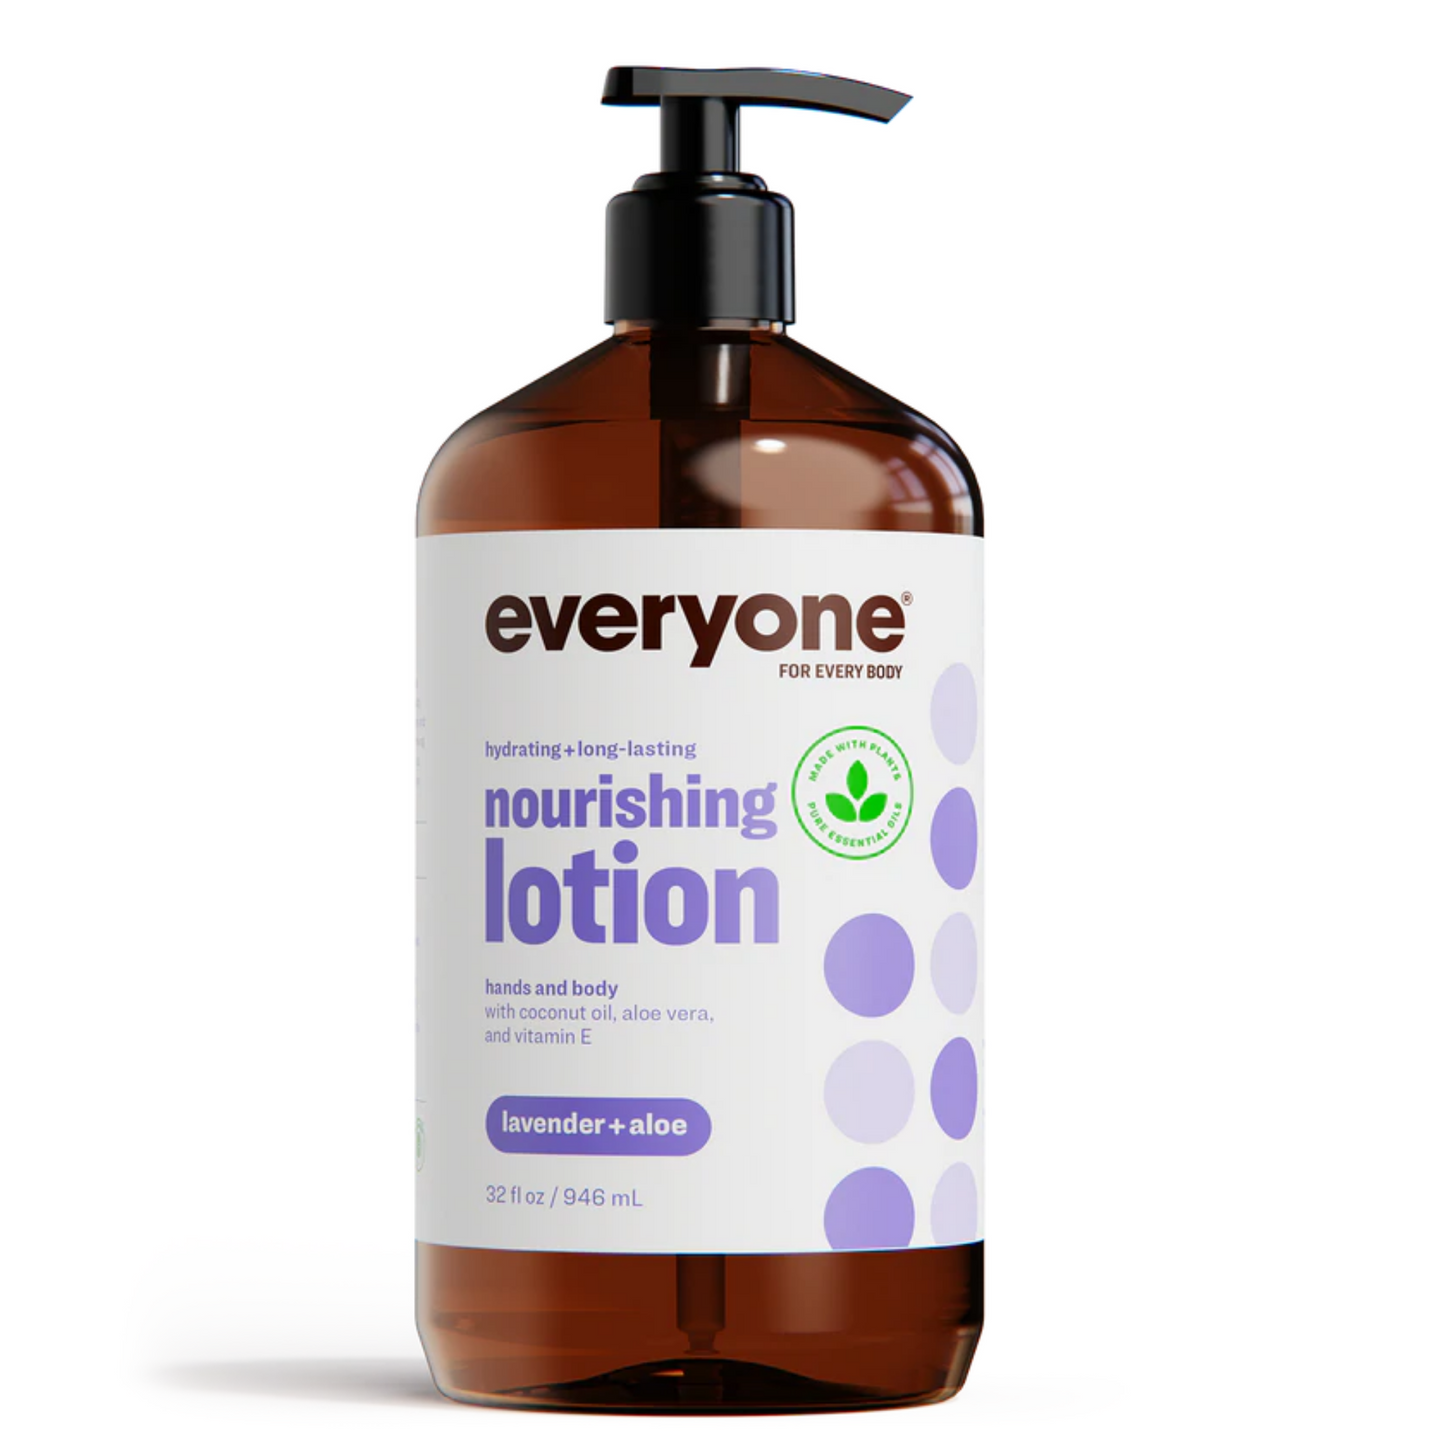 Primary image of Everyone 3-in-1 Lavender + Aloe Lotion